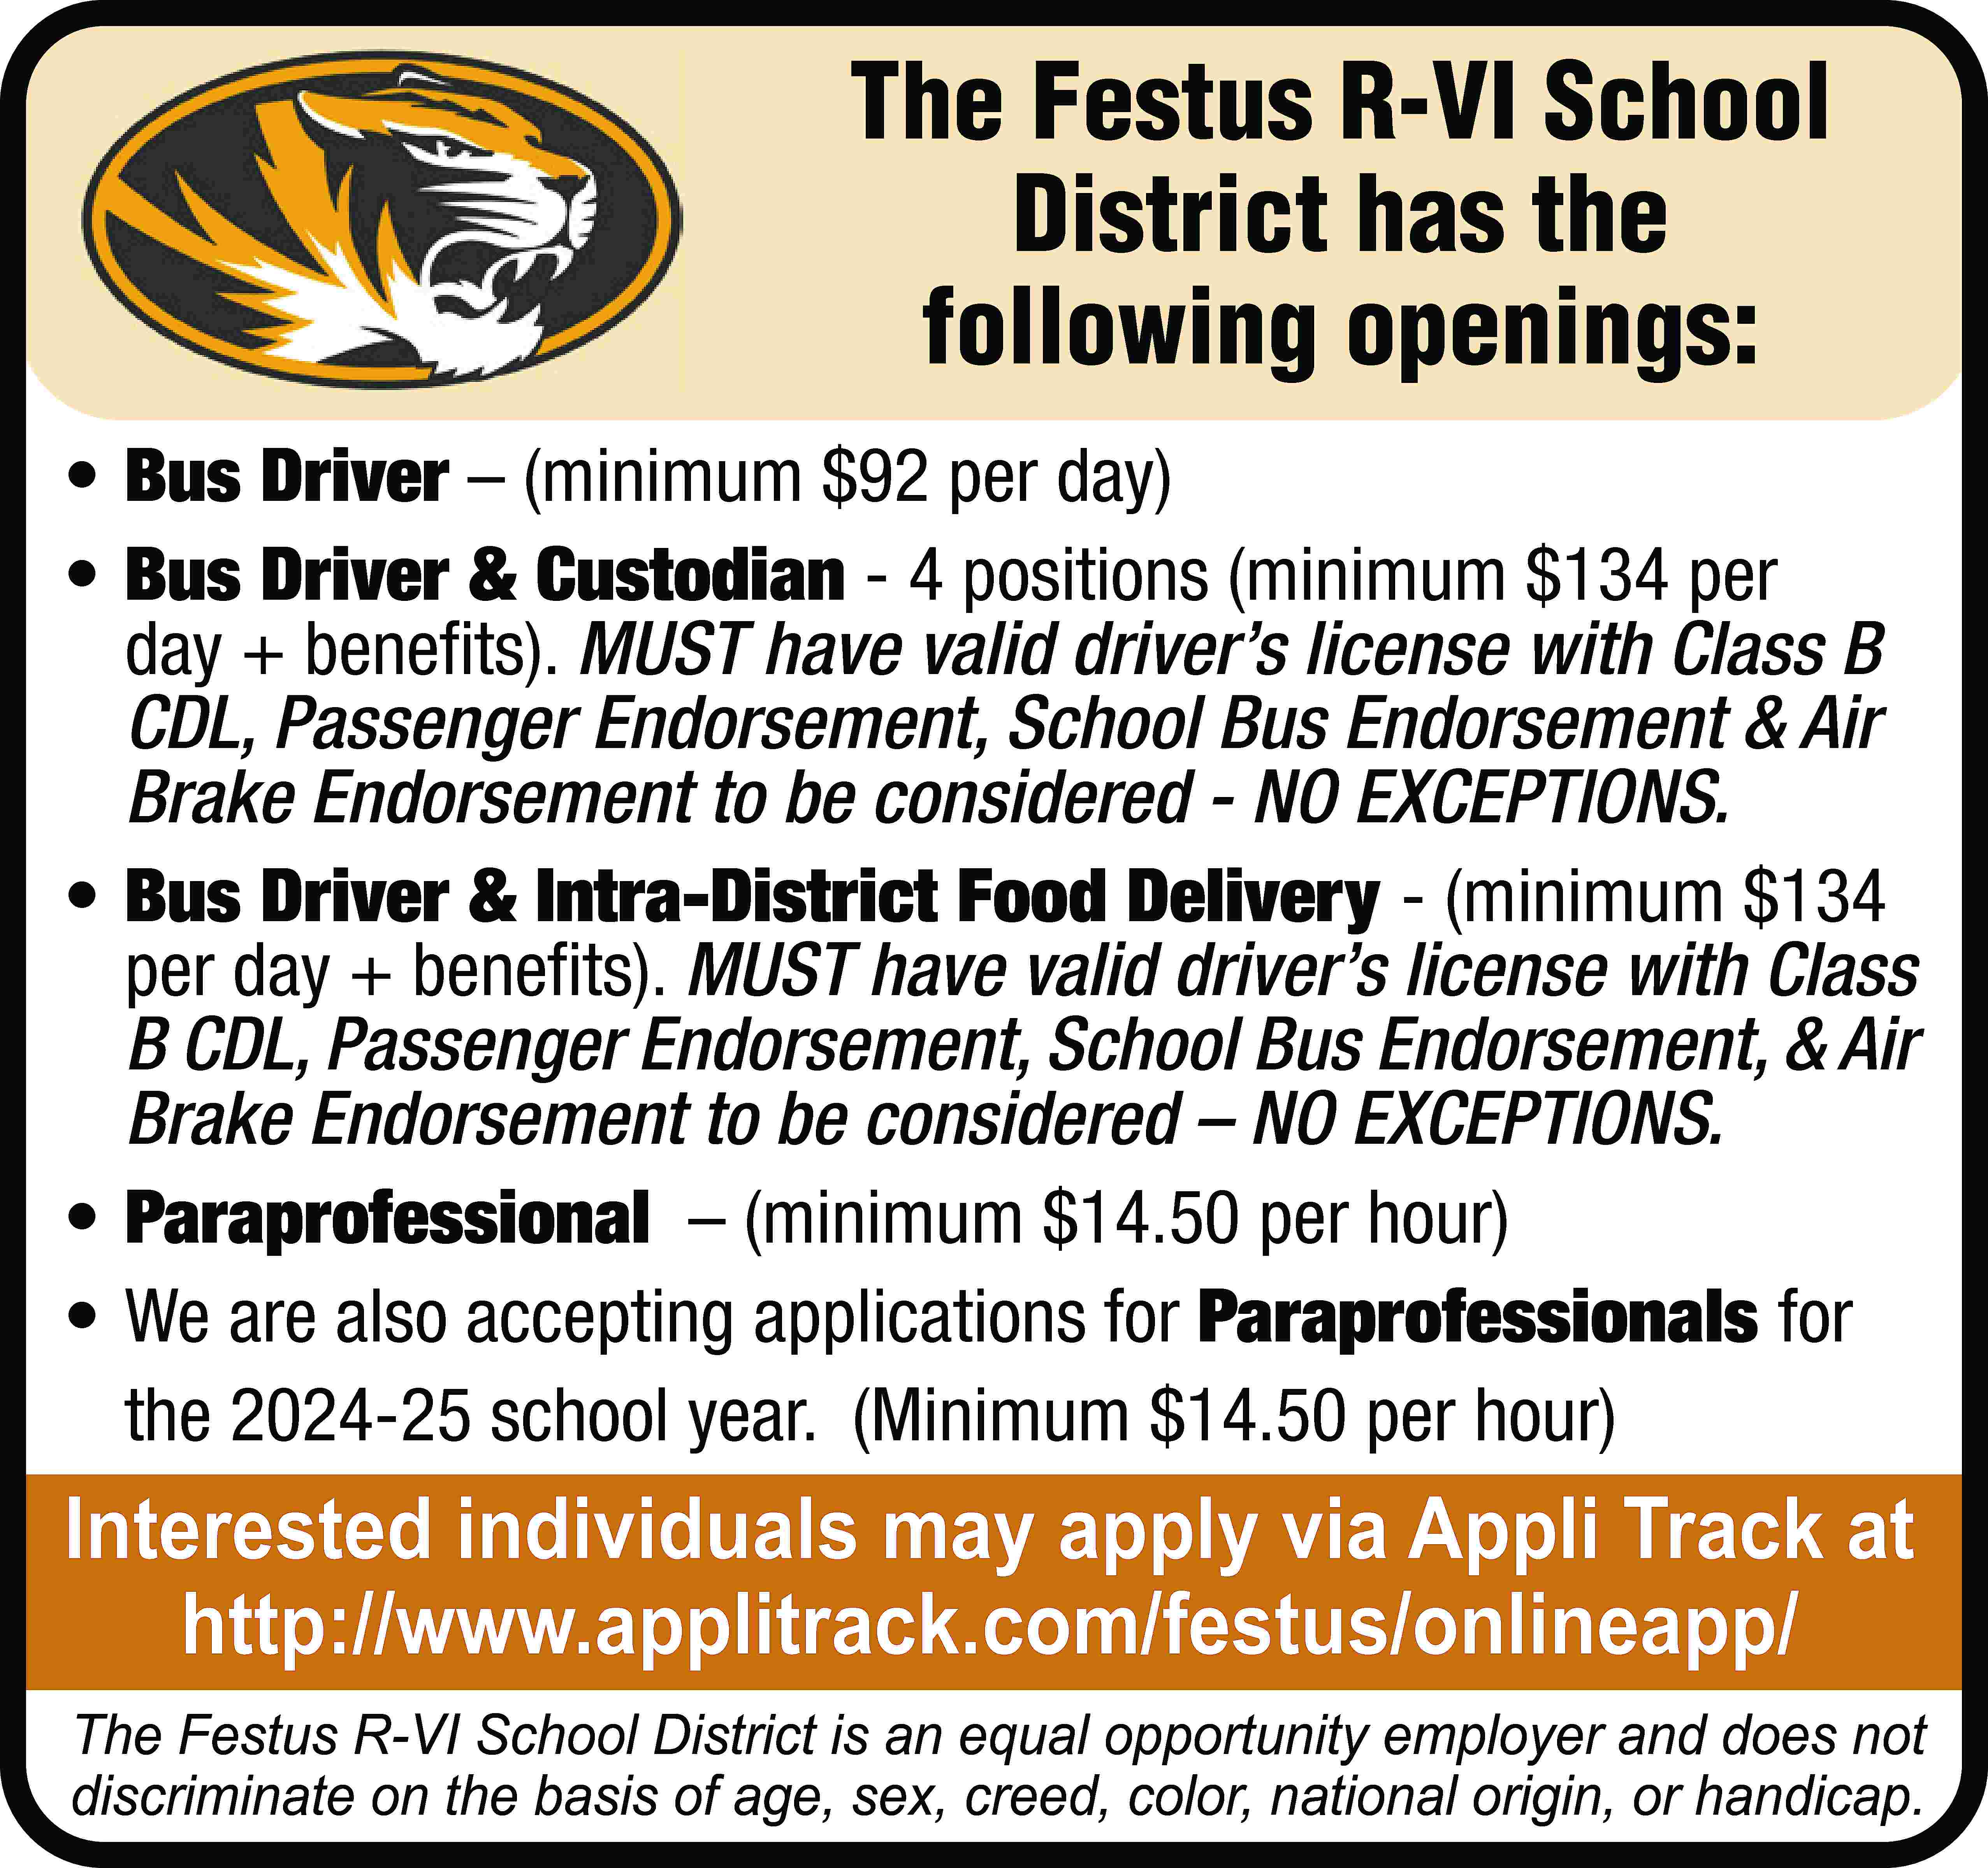 The Festus R-VI School District  The Festus R-VI School District has the following openings: • Bus Driver – (minimum $92 per day) • Bus Driver & Custodian - 4 positions (minimum $134 per day + benefits). MUST have valid driver’s license with Class B CDL, Passenger Endorsement, School Bus Endorsement & Air Brake Endorsement to be considered - NO EXCEPTIONS. • Bus Driver & Intra-District Food Delivery - (minimum $134 per day + benefits). MUST have valid driver’s license with Class B CDL, Passenger Endorsement, School Bus Endorsement, & Air Brake Endorsement to be considered – NO EXCEPTIONS. • Paraprofessional – (minimum $14.50 per hour) • We are also accepting applications for Paraprofessionals for the 2024-25 school year. (Minimum $14.50 per hour) Interested individuals may apply via Appli Track at http://www.applitrack.com/festus/onlineapp/ The Festus R-VI School District is an equal opportunity employer and does not discriminate on the basis of age, sex, creed, color, national origin, or handicap.